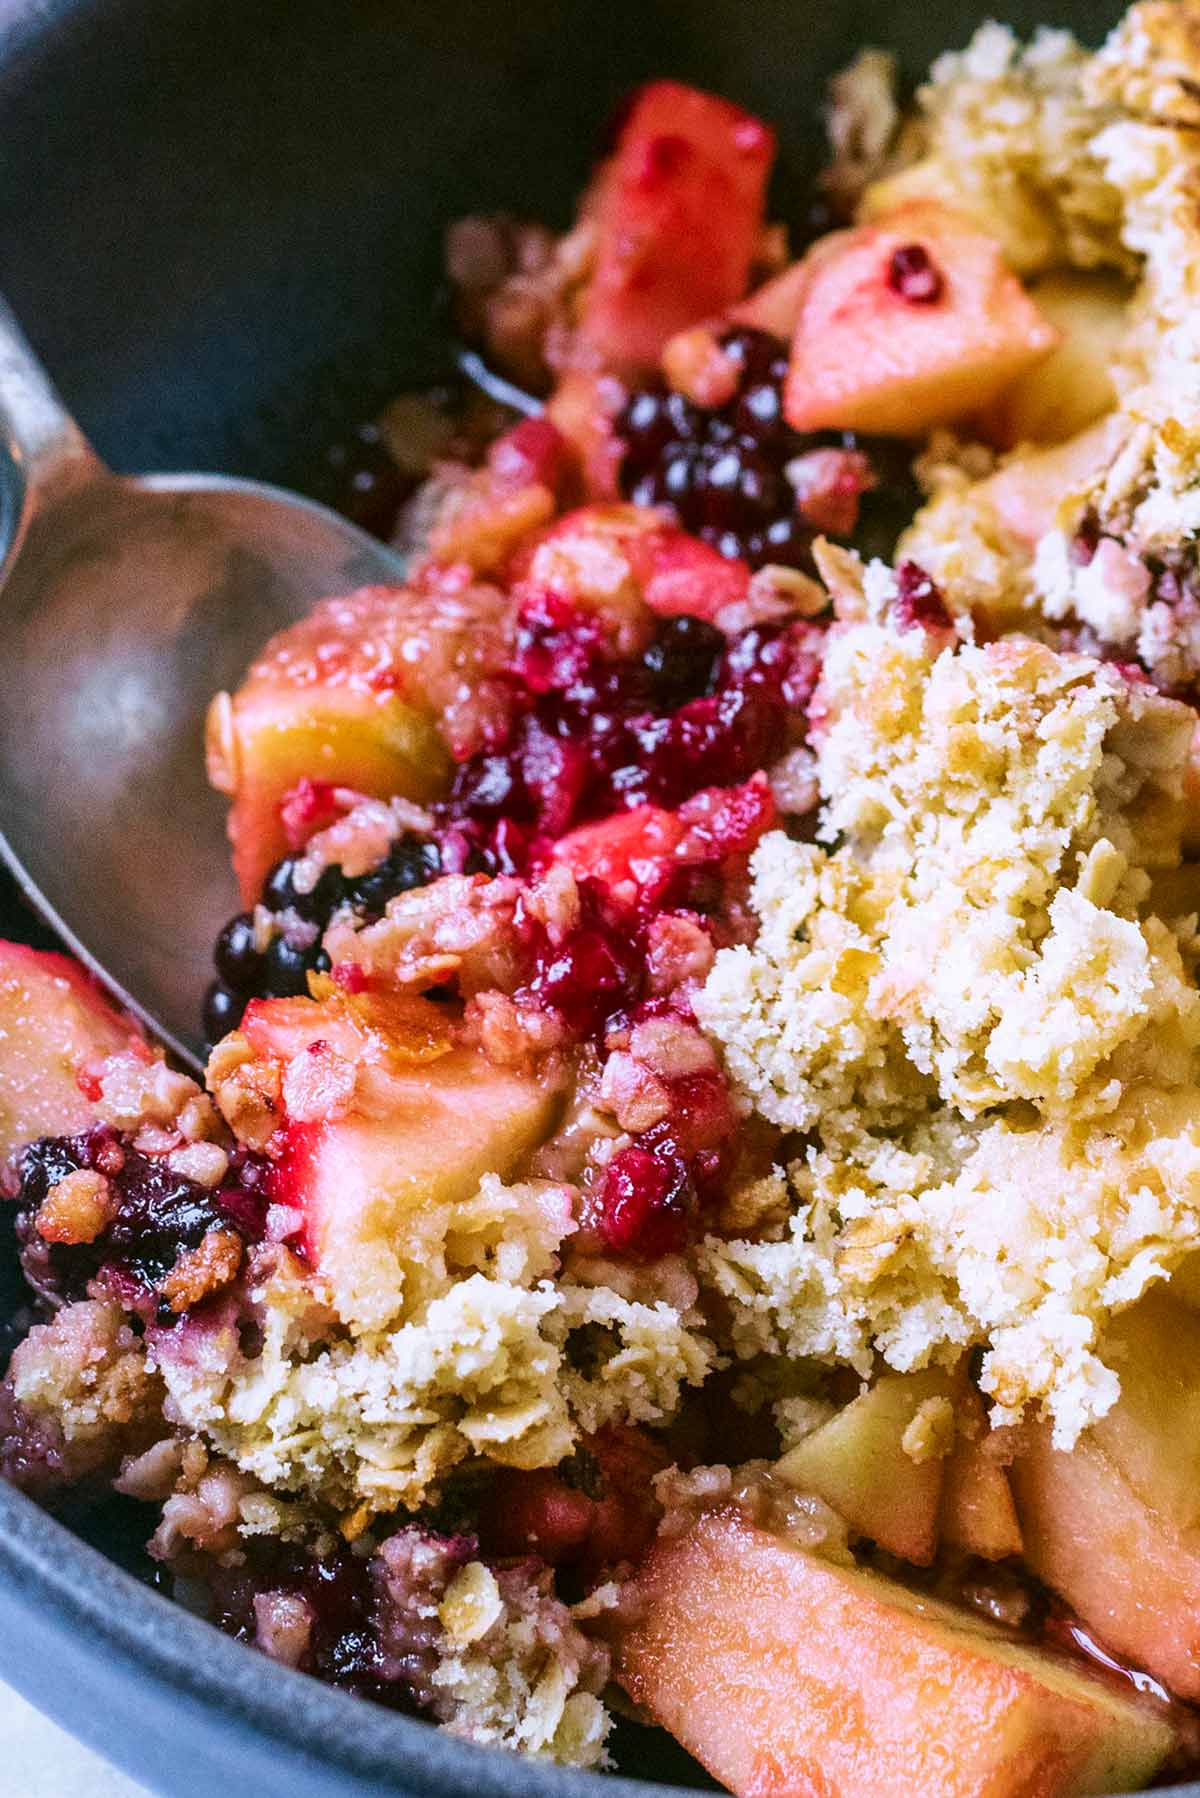 A spoon digging into a bowl of fruit crumble.